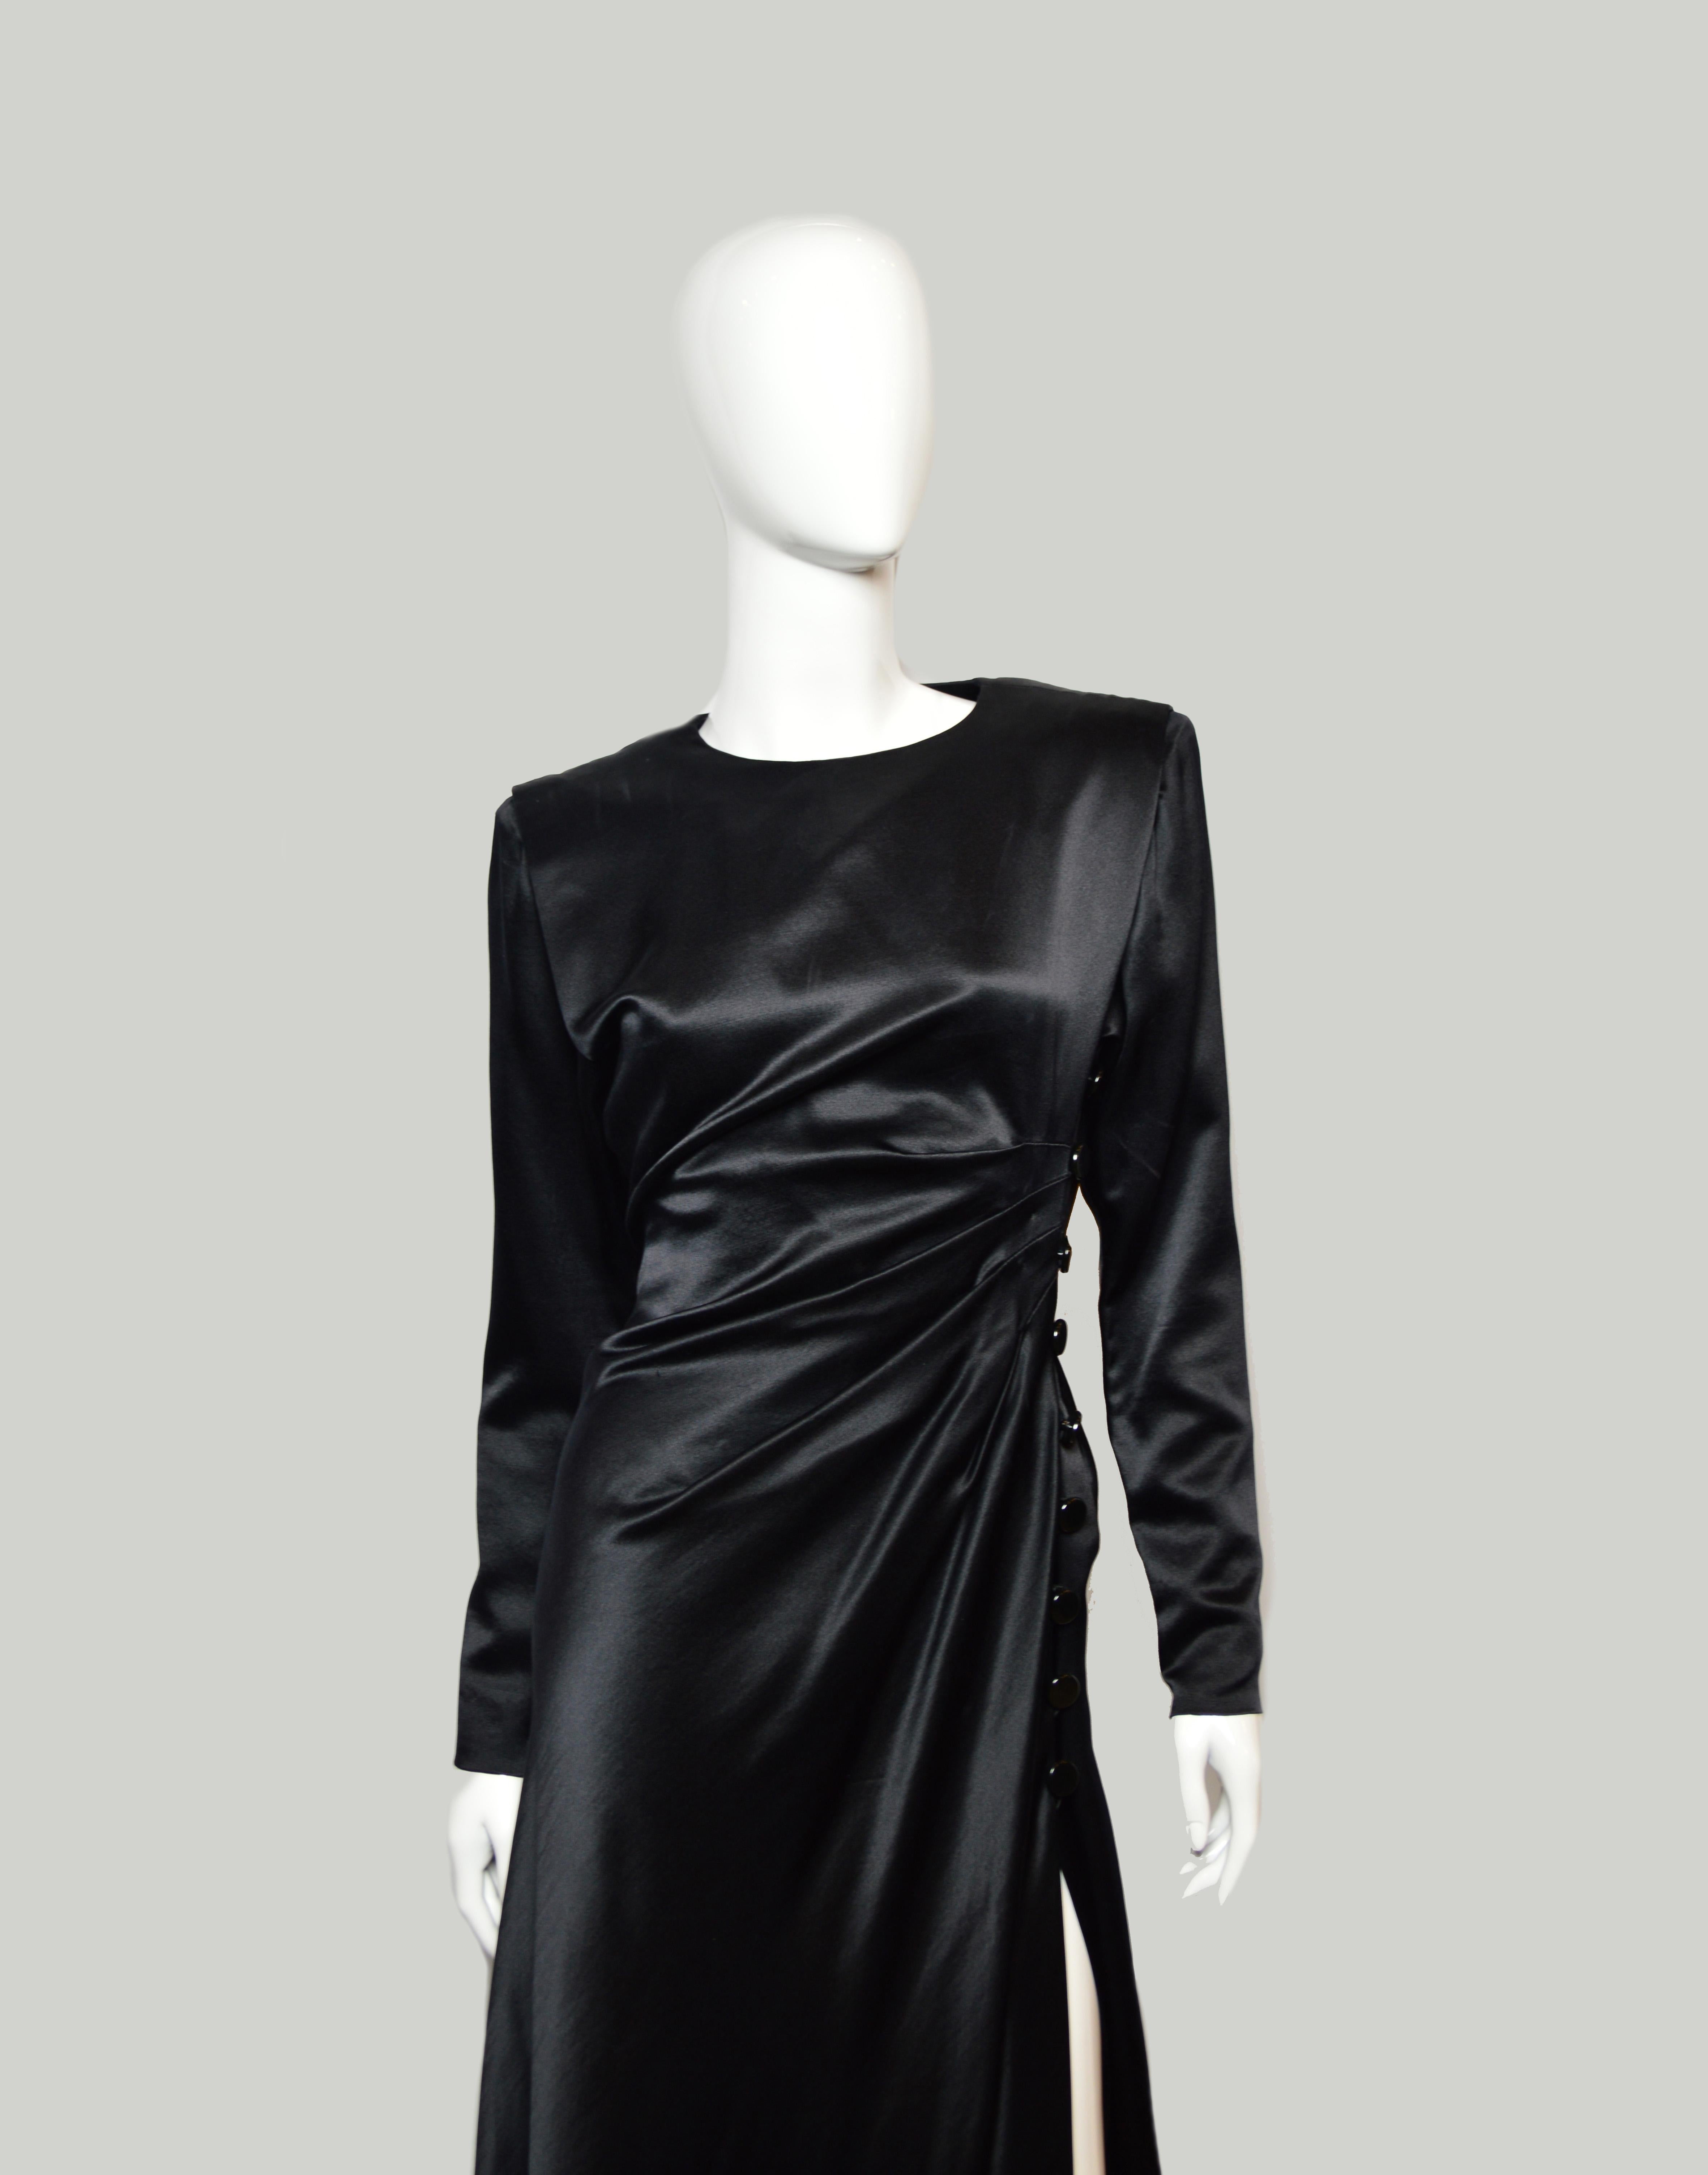 Yves Saint Laurent runway vintage black evening dress, Fall-winter 1987-1988 show.

A flowing dress of incredible beauty, accurately reflecting the style of the great couturier.

Shoulders with a clear line, draped with buttons in the chest area,